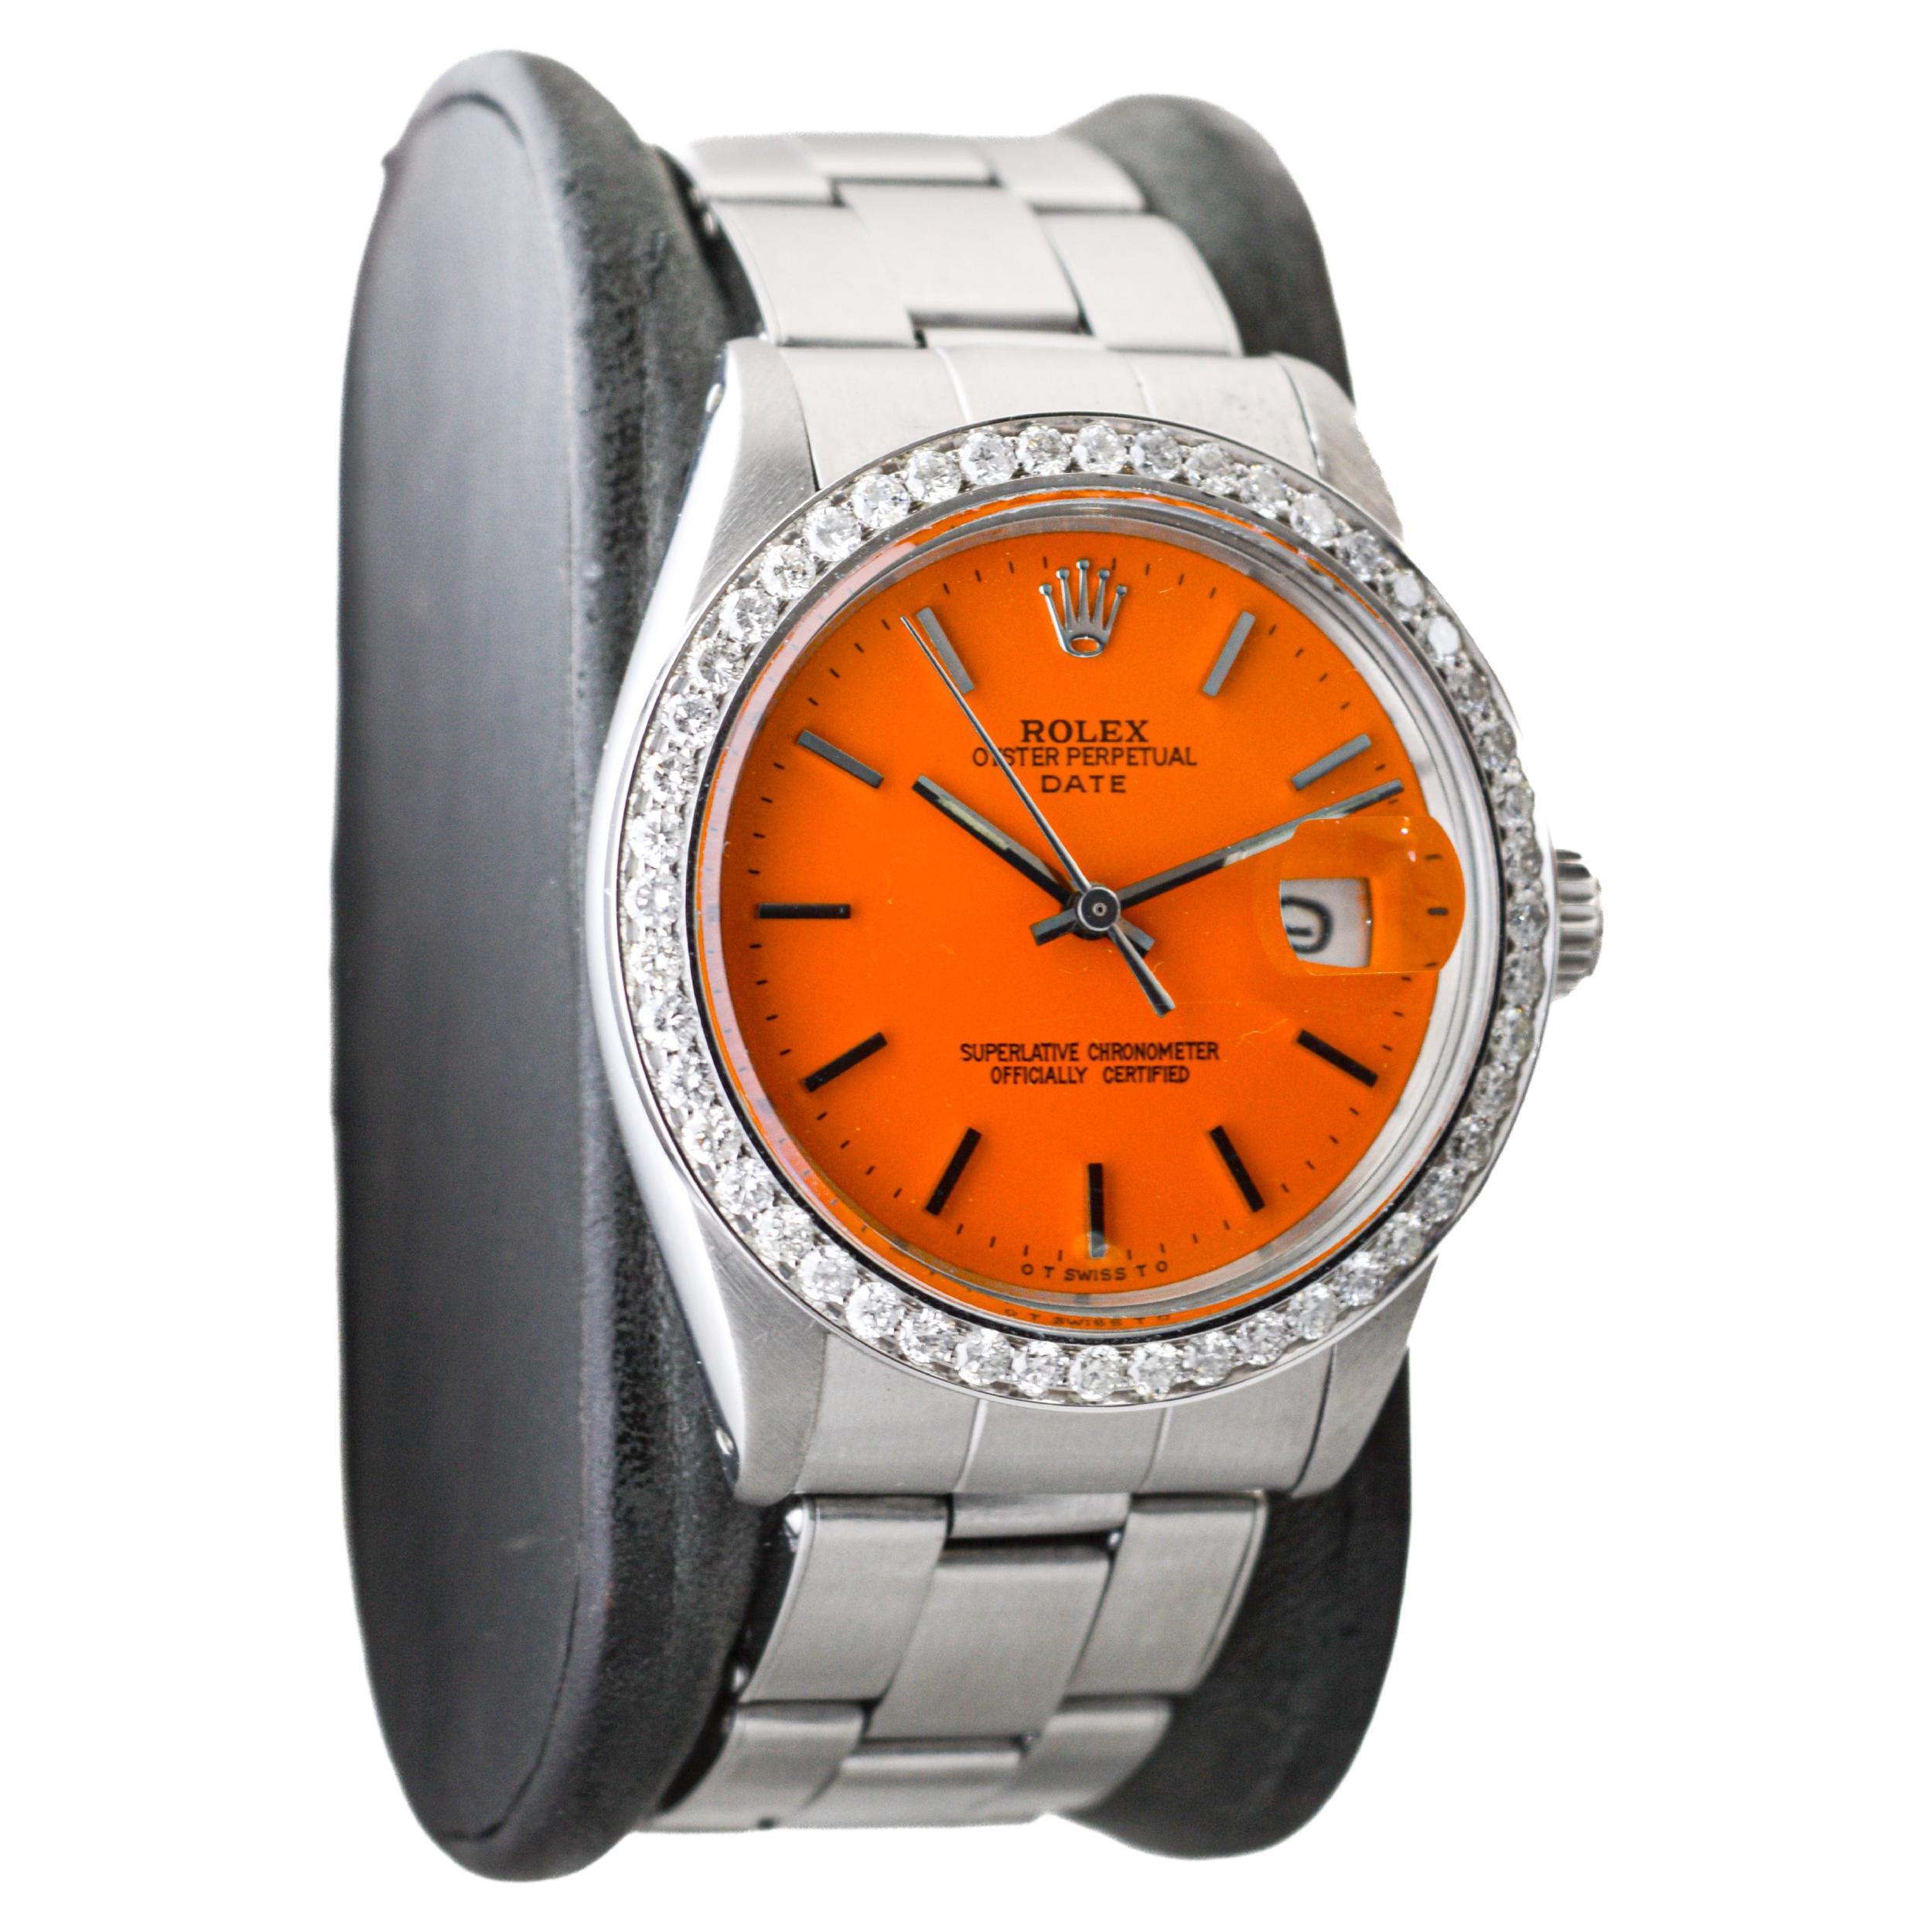 FACTORY / HOUSE: Rolex Watch Company
STYLE / REFERENCE: Oyster Perpetual Date / Reference 1500
METAL / MATERIAL: Stainless Steel
CIRCA / YEAR: 1970's
DIMENSIONS / SIZE: Length 42mm X Diameter 34mm
MOVEMENT / CALIBER: Perpetual Winding / 26 Jewels /